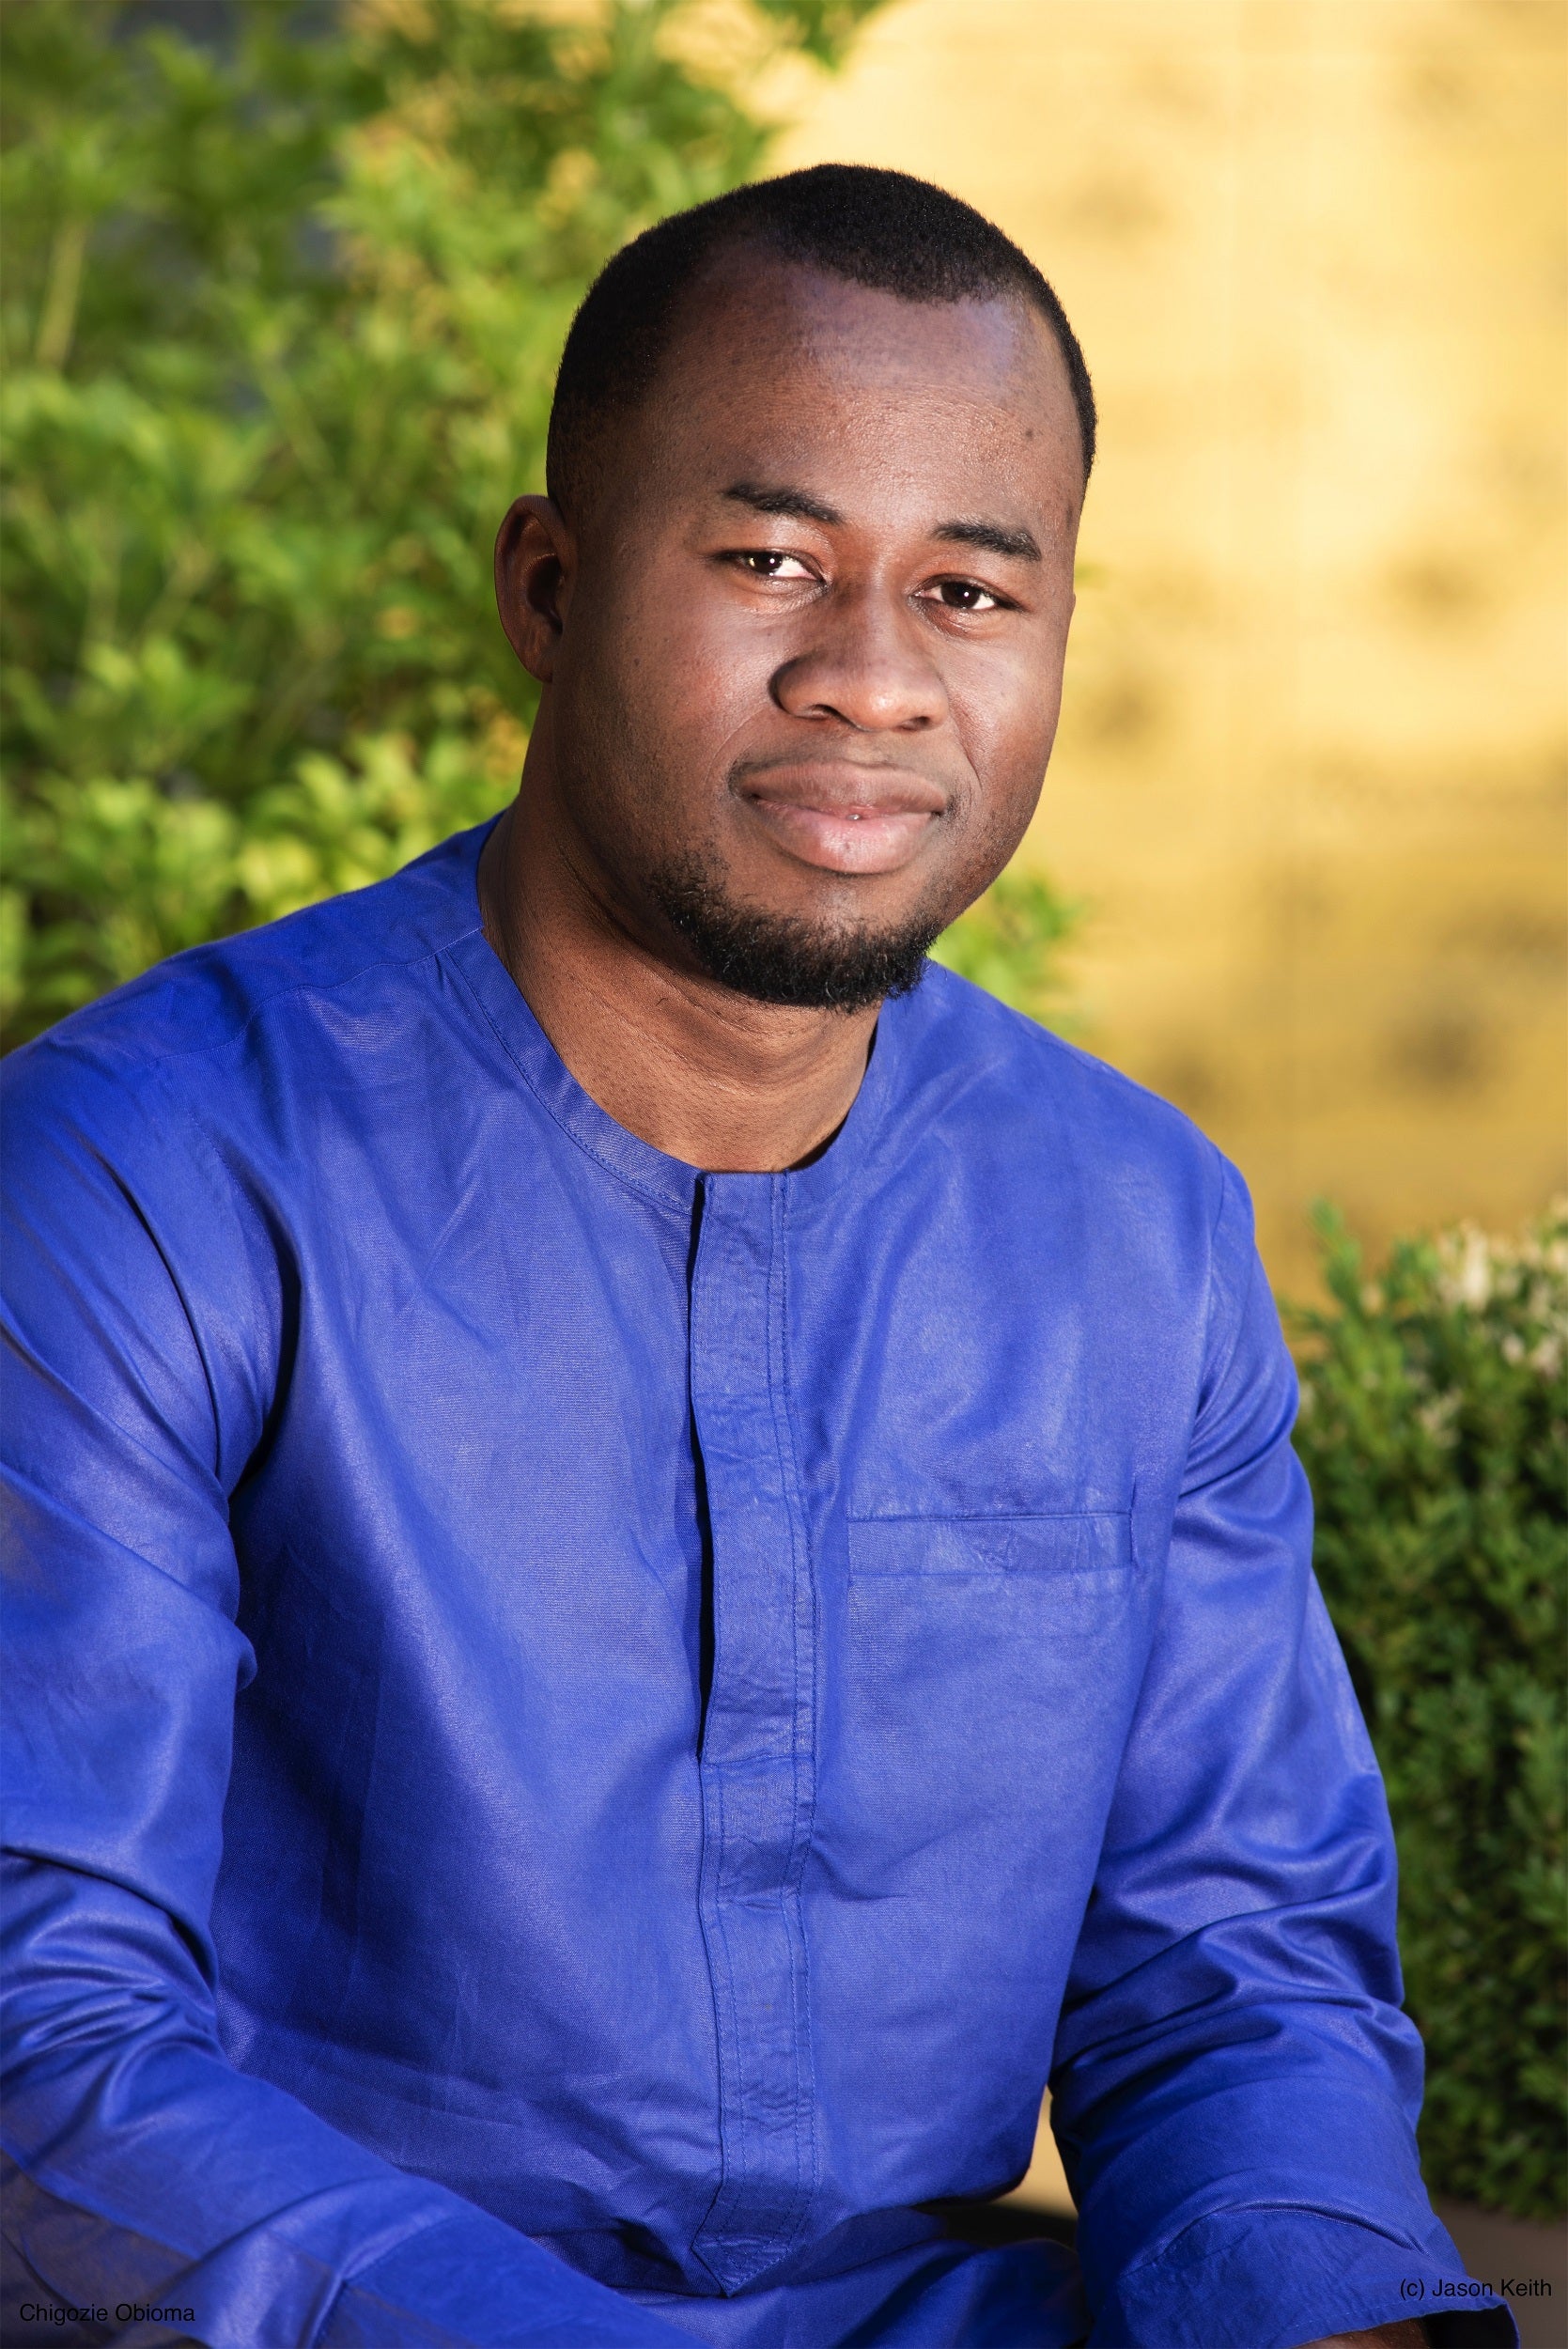 Chigozie Obioma’s second novel, ‘An Orchestra of Minorities’ is a fast-moving tragicomedy